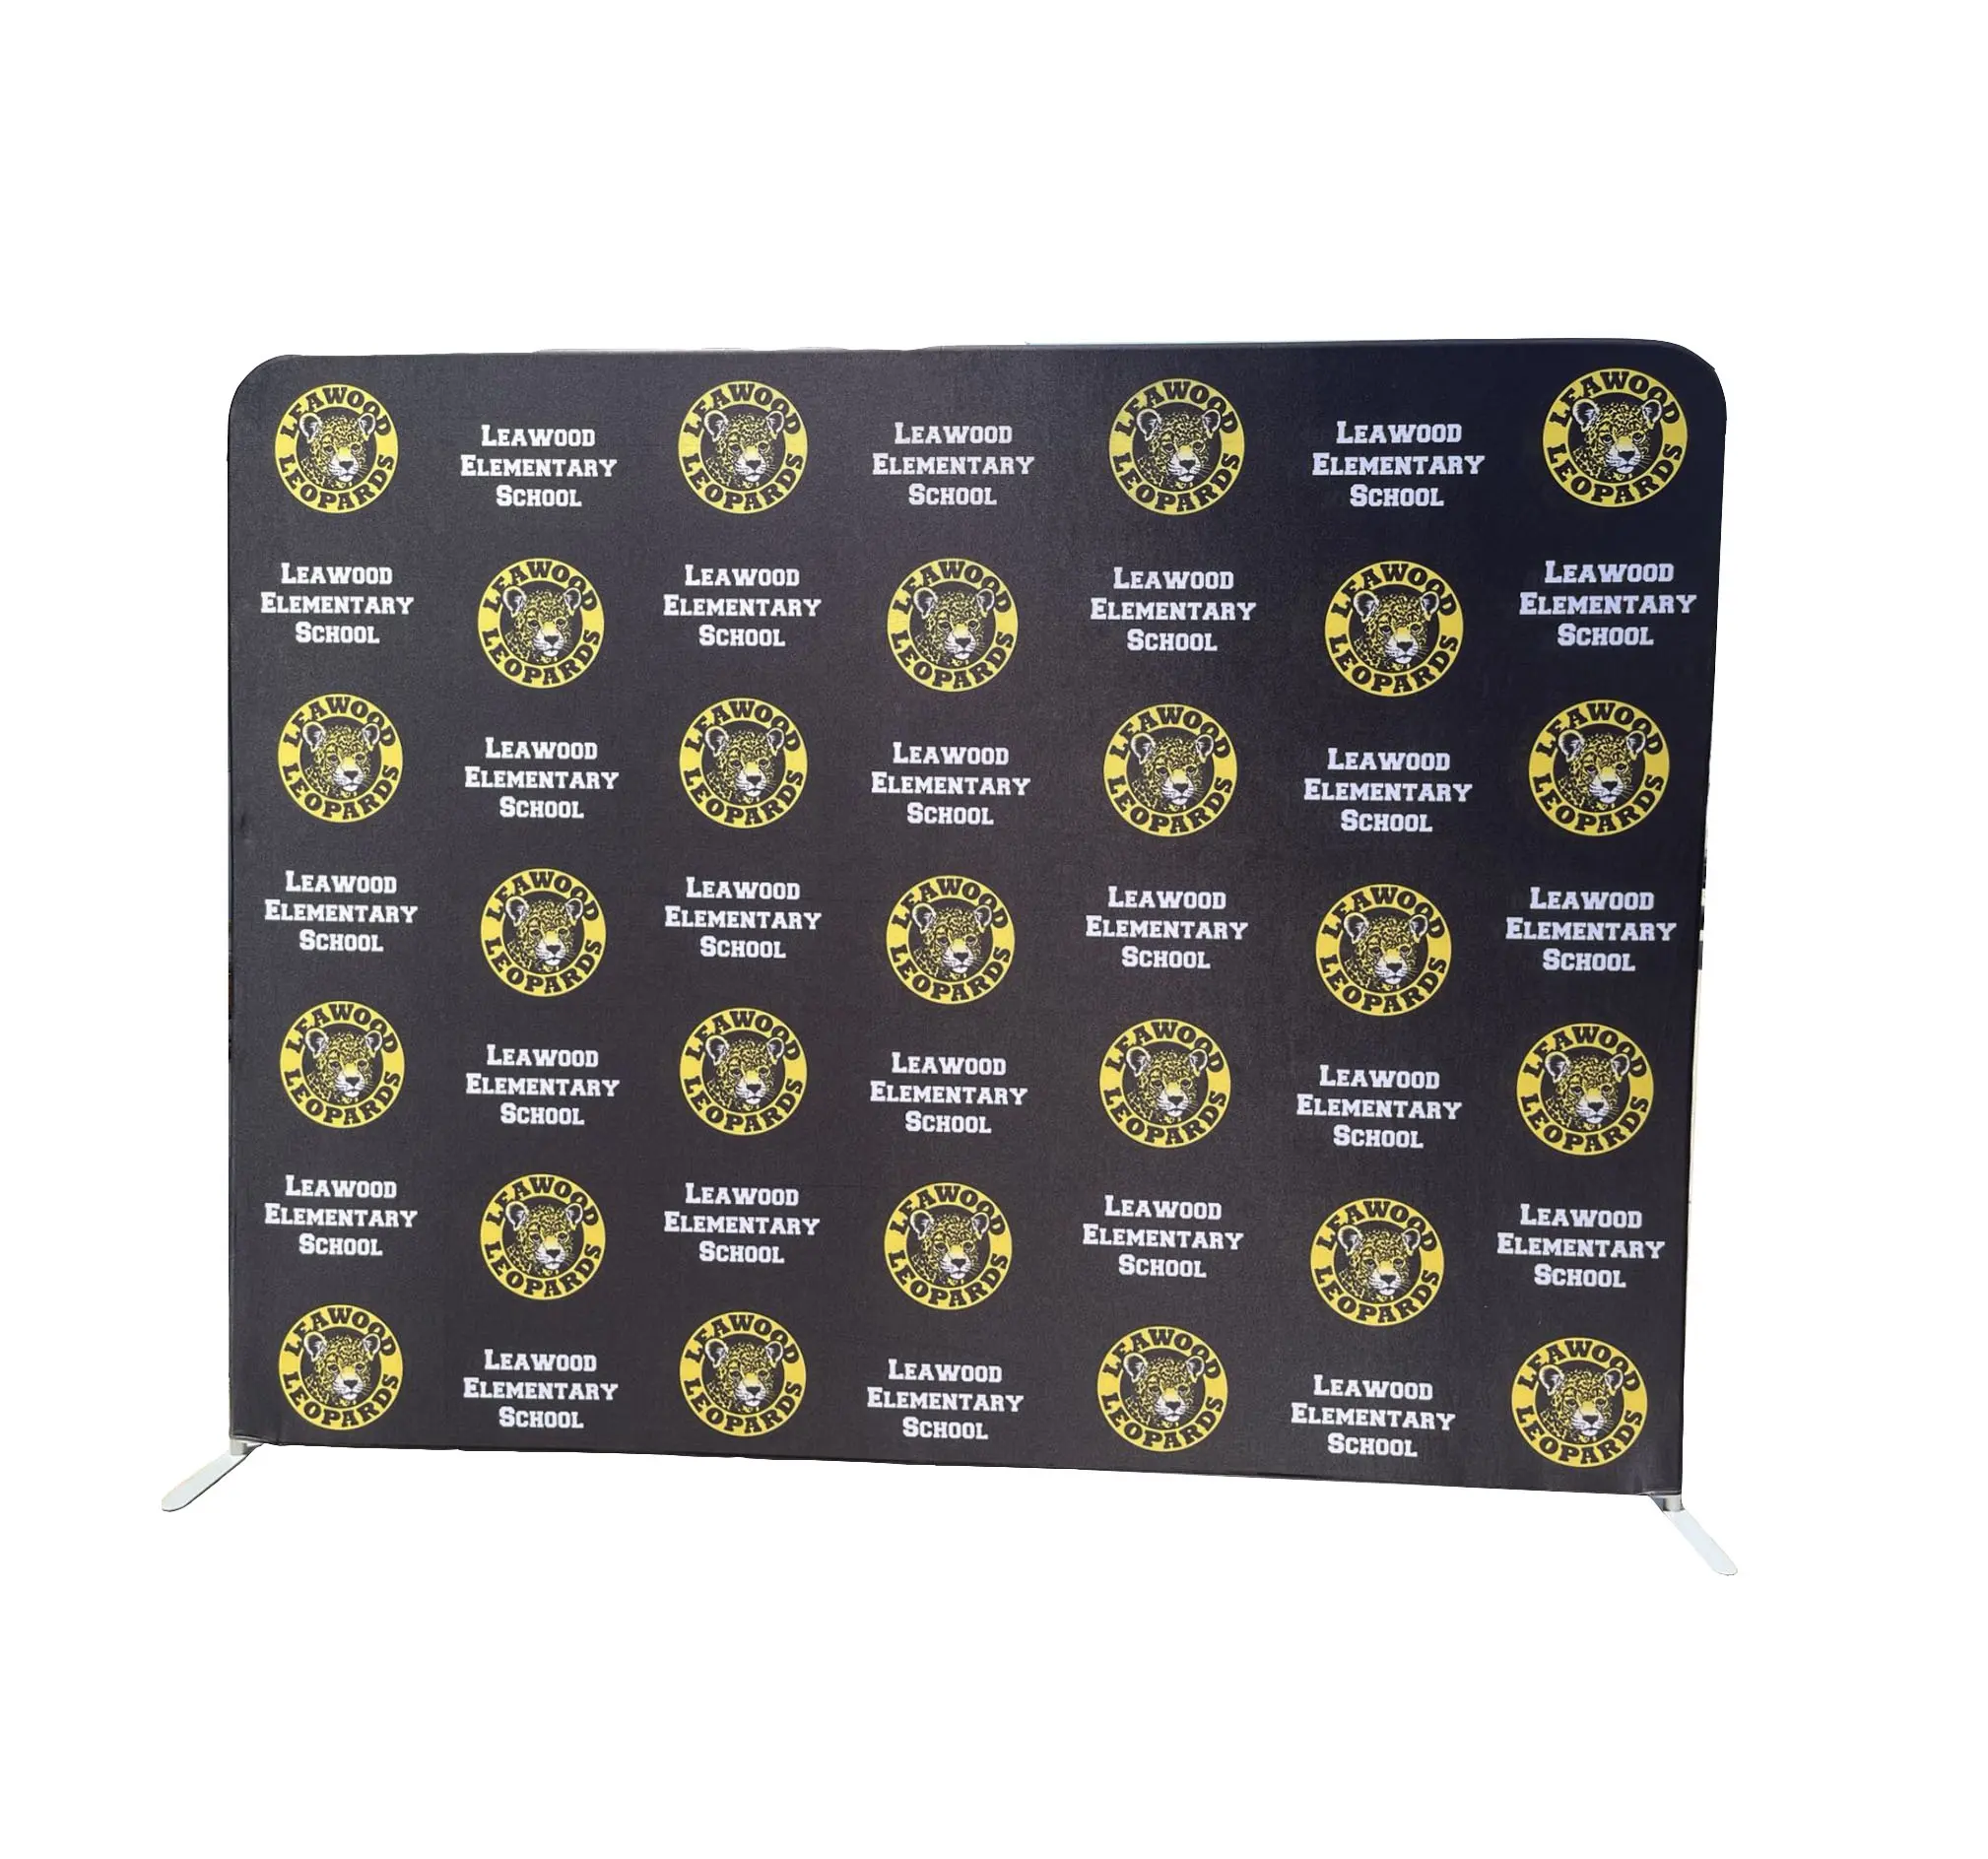 Step and Repeat Display Backdrop Banner Stand 10' x 8' Adjustable Telescopic Display Backdrop Stand for Trade Show  Photo Booth